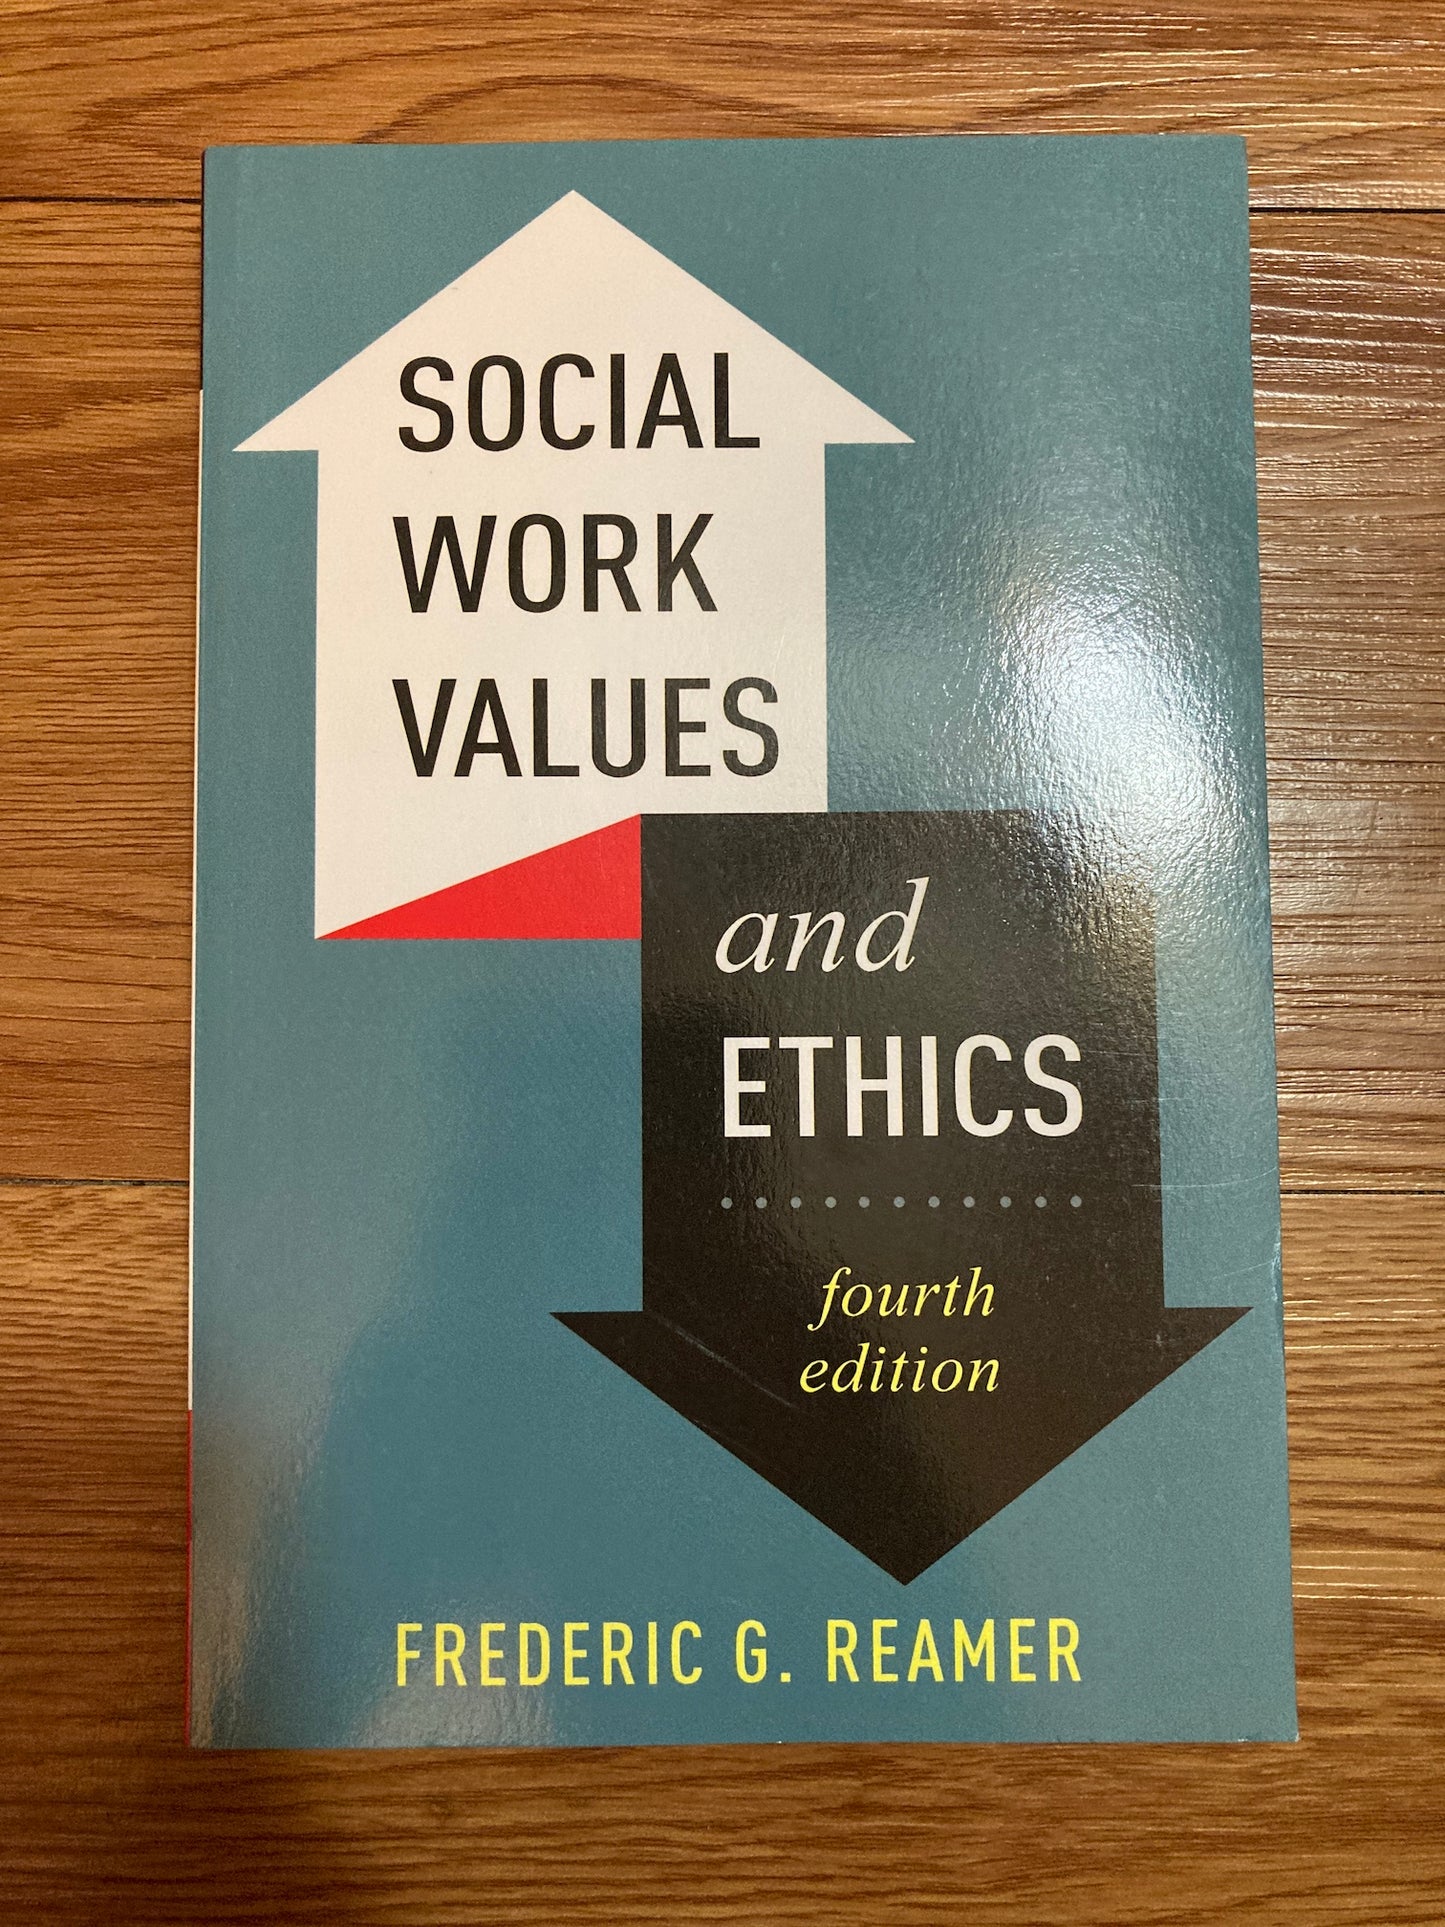 Social Work Values and Ethics (4th Edition), Frederic G. Reamer